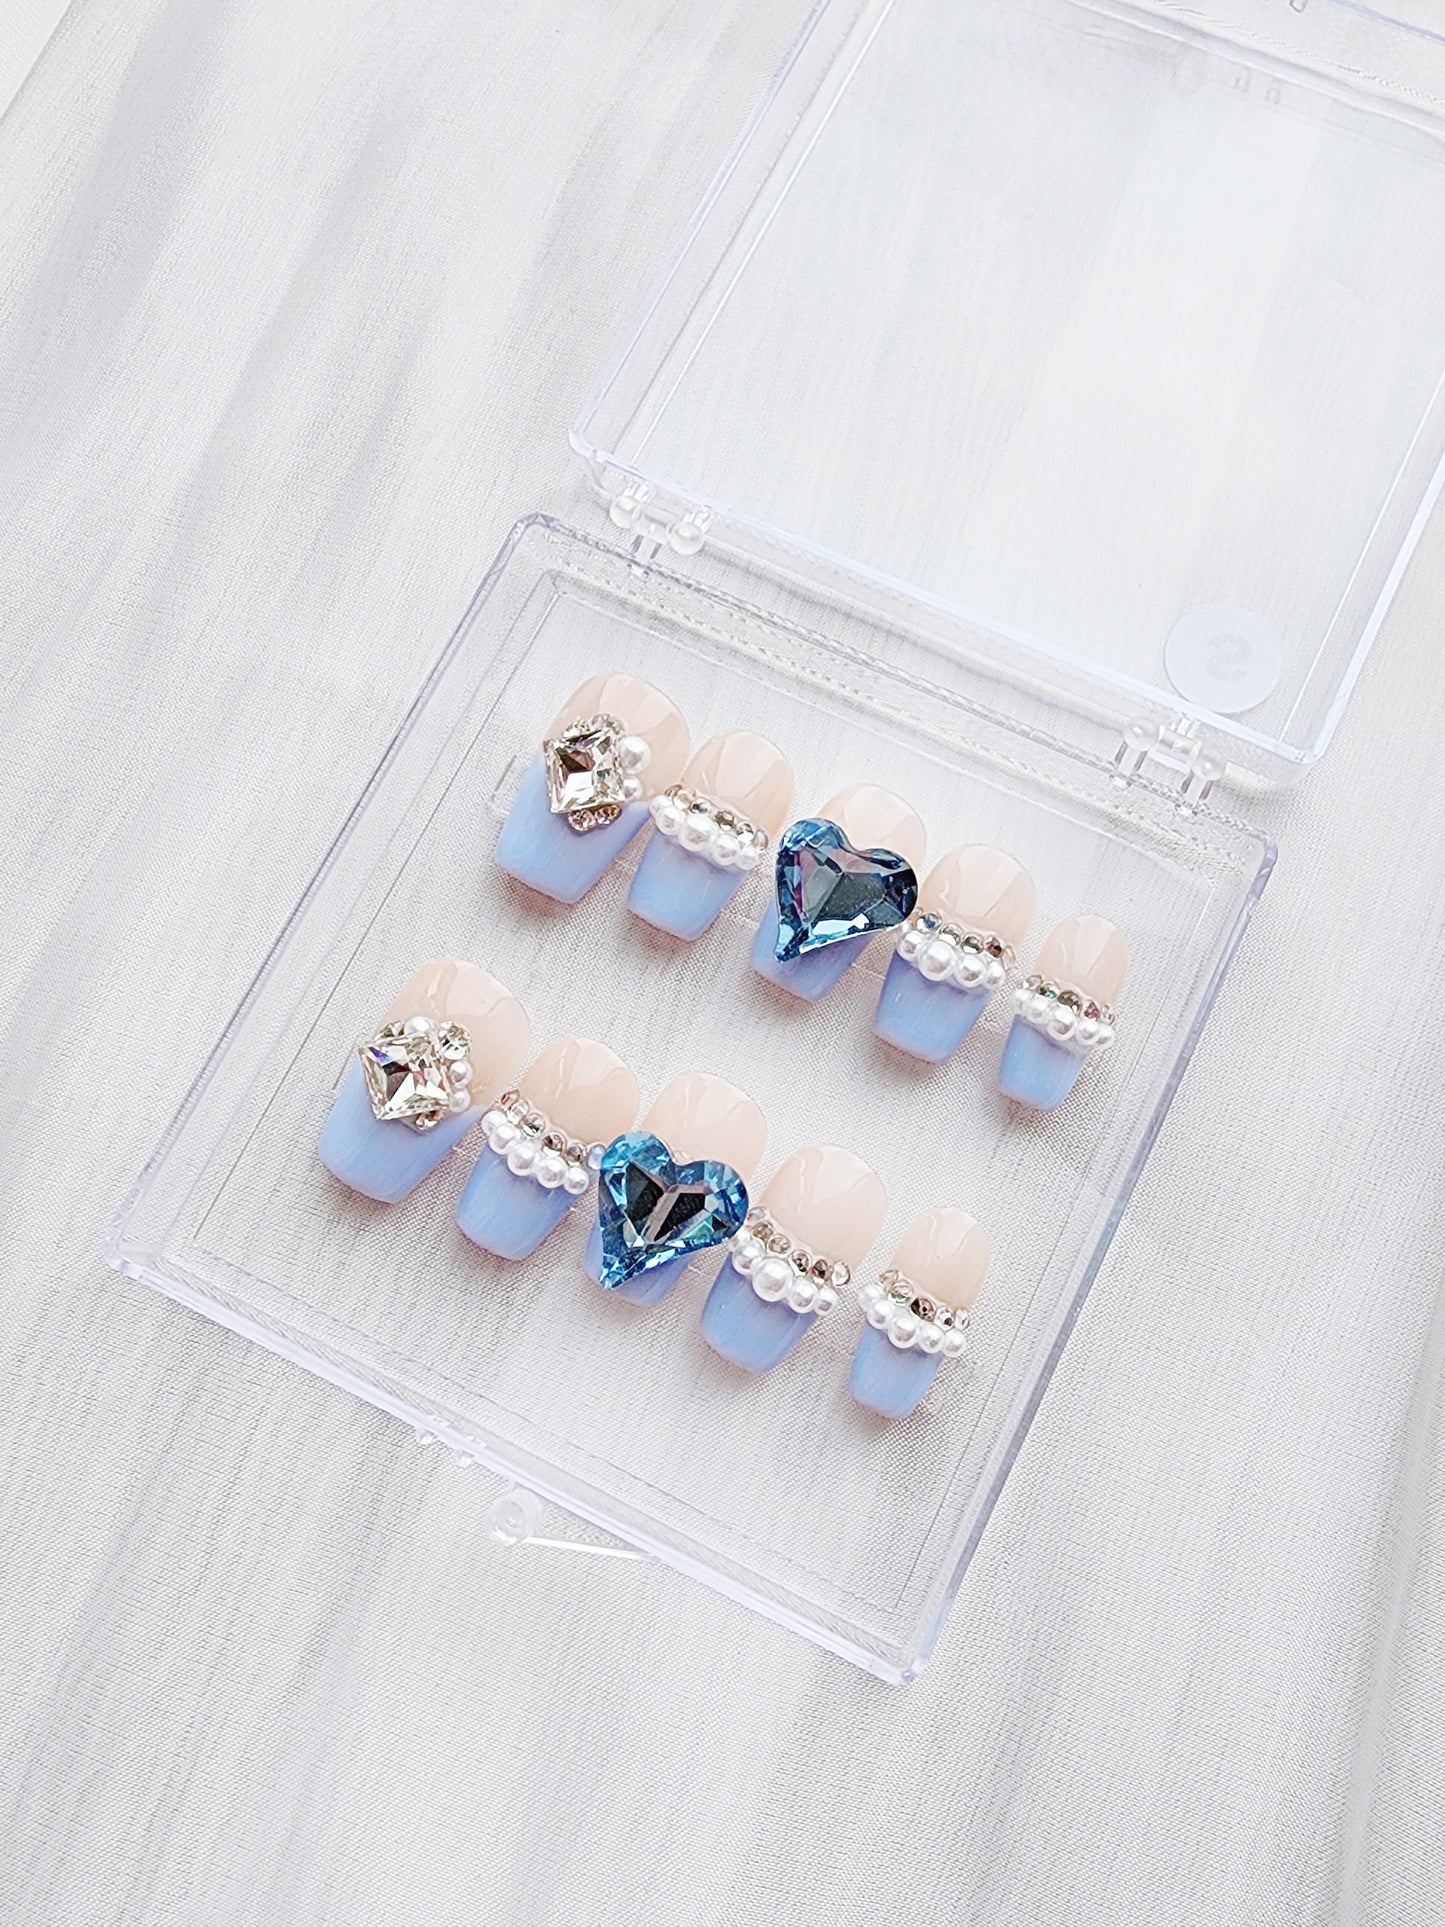 [N01] Blue with Pearl and Diamonds Press On Manicure Nails